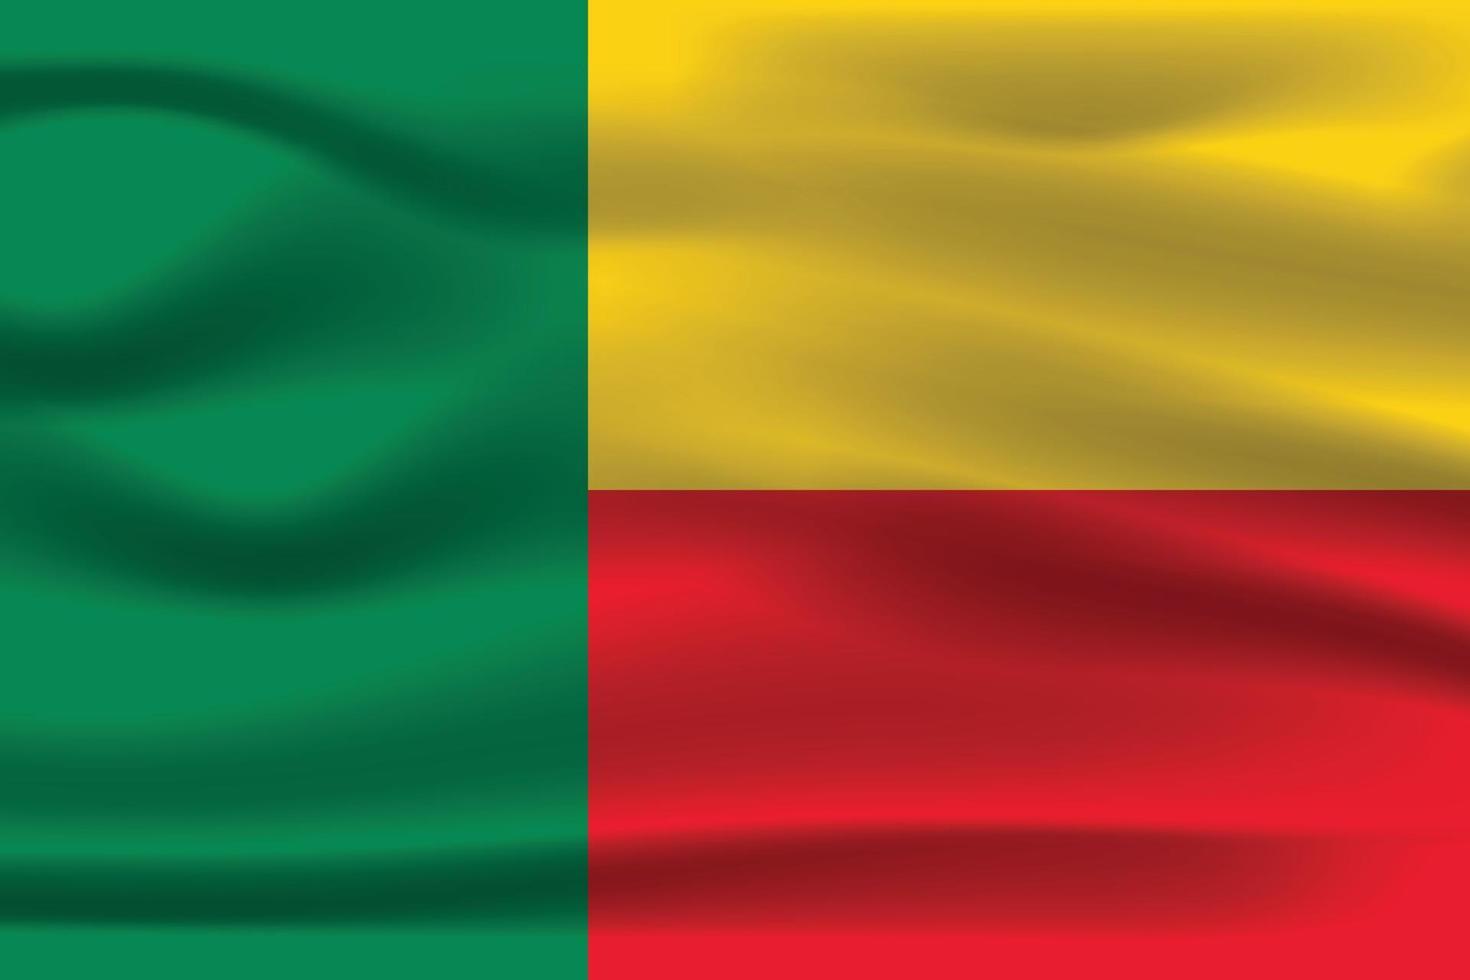 The Realistic National flag of Benin vector